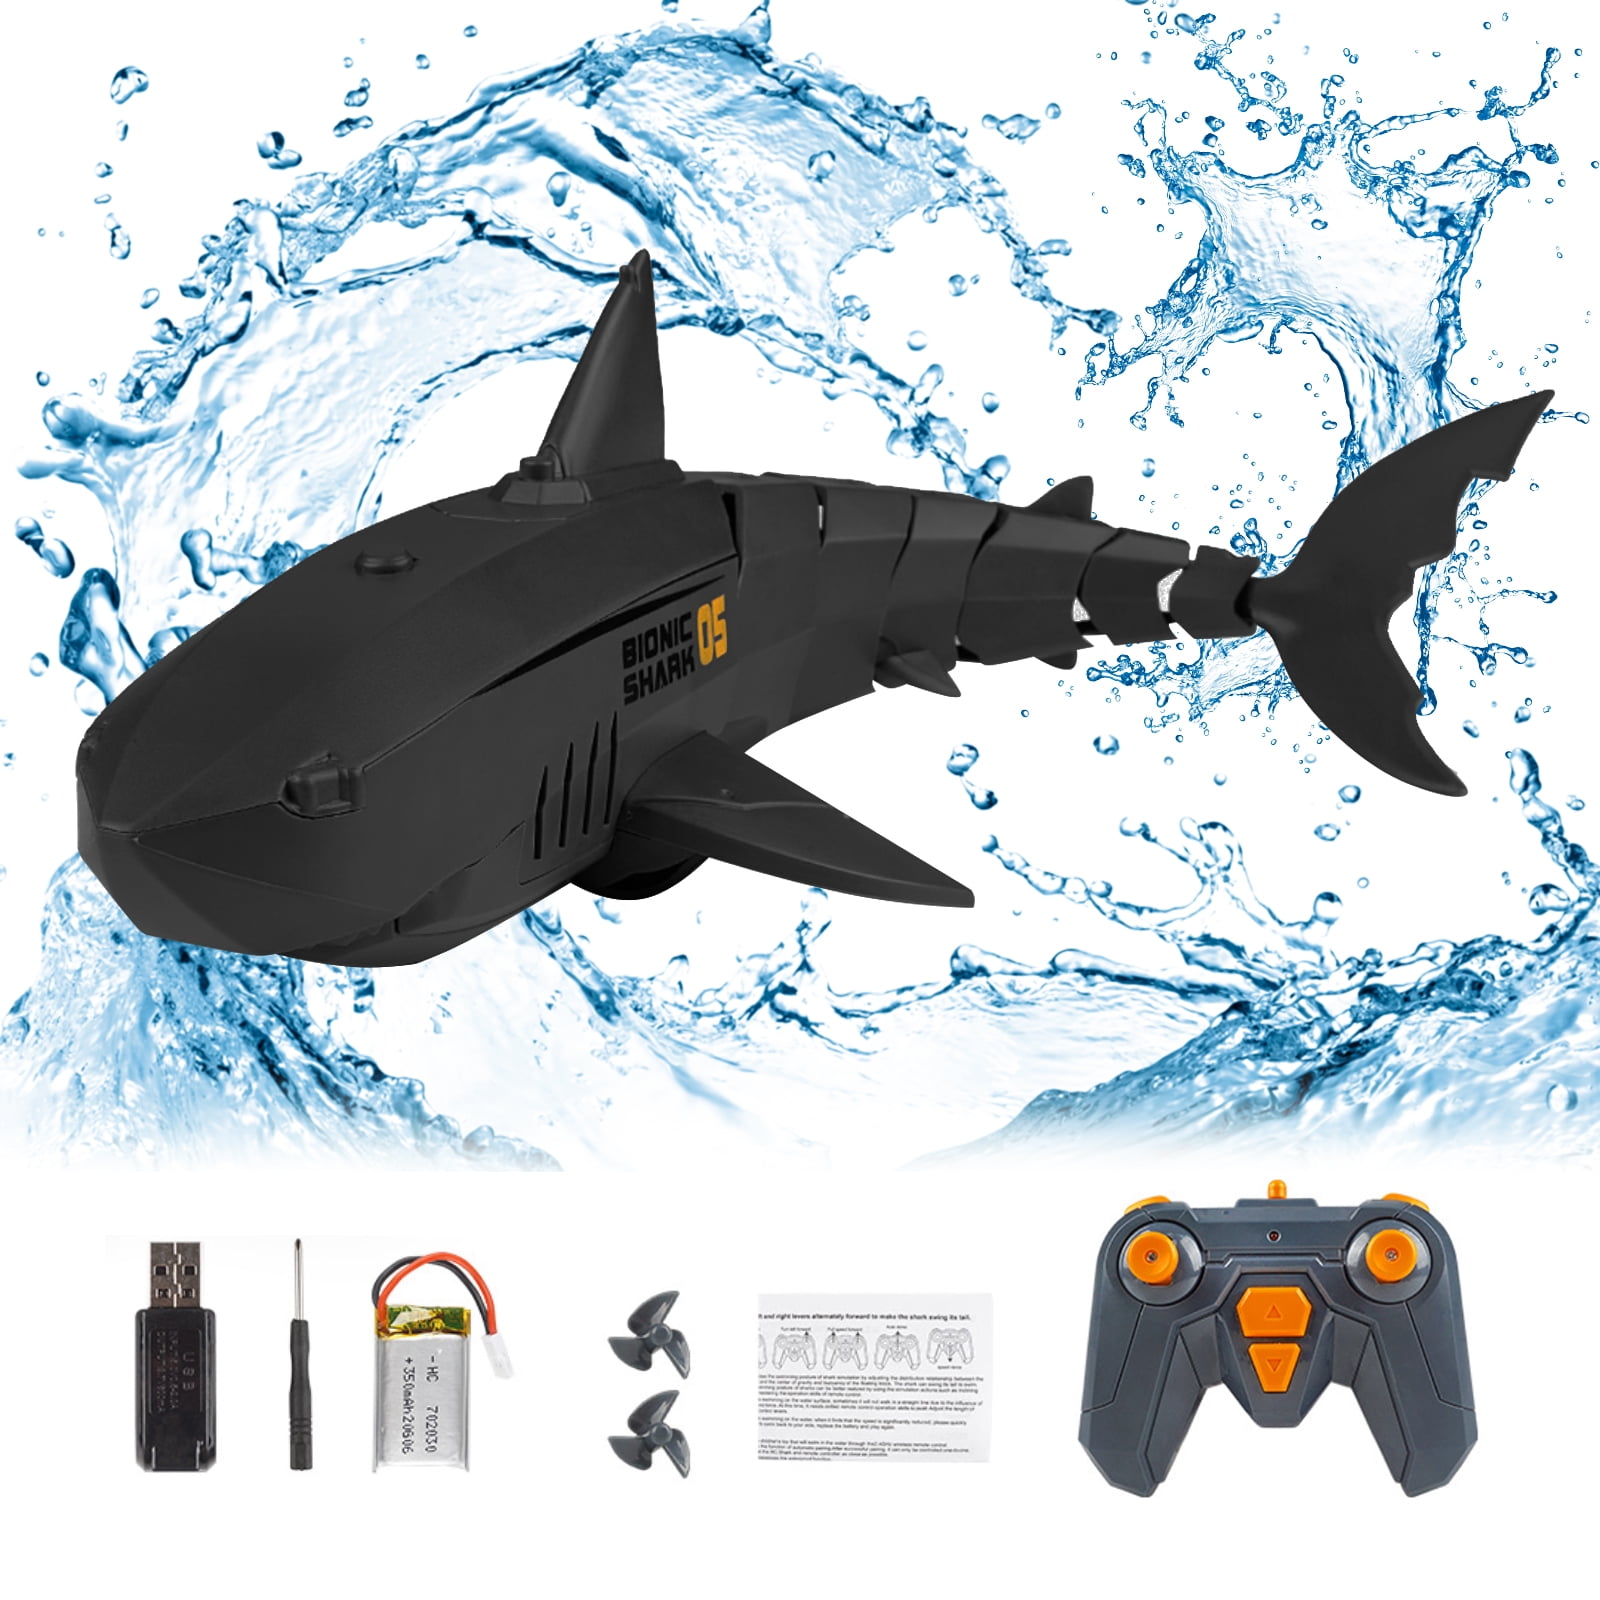 Jellydog Toy 2.4 GHz Remote Control Shark Toy - High Simulation, for ...